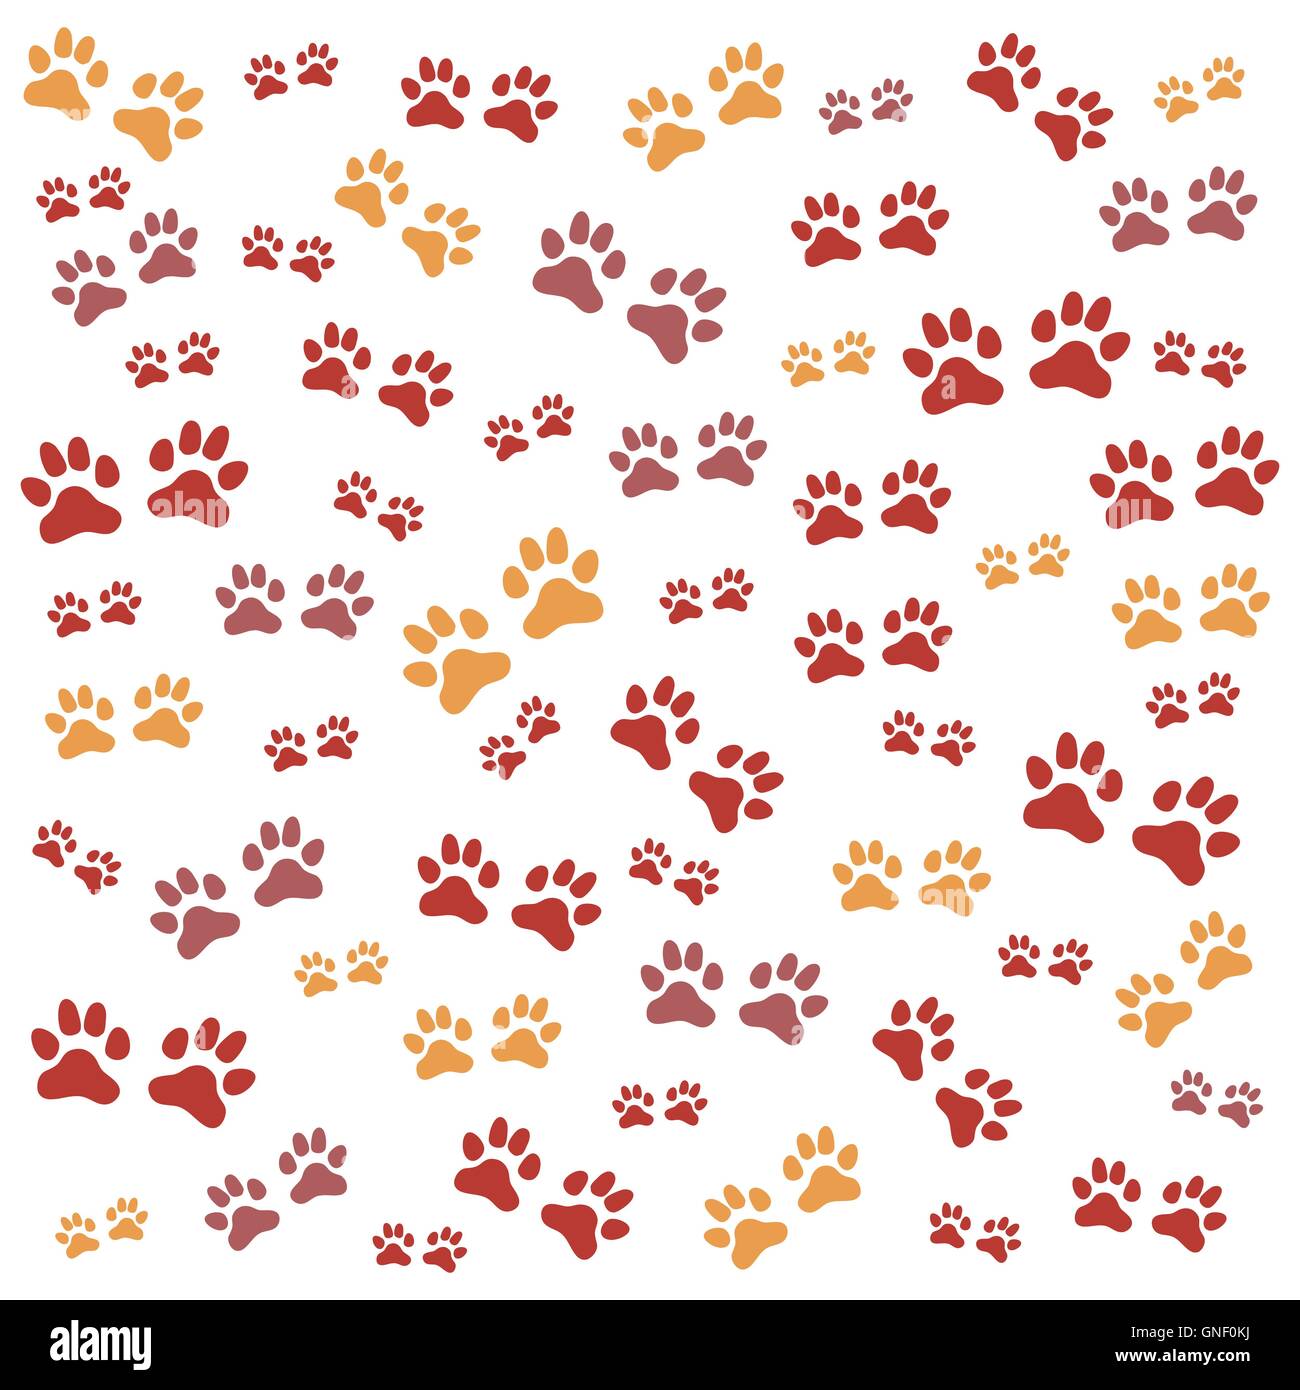 Nice picture of wild animal traces on a white background Stock Vector